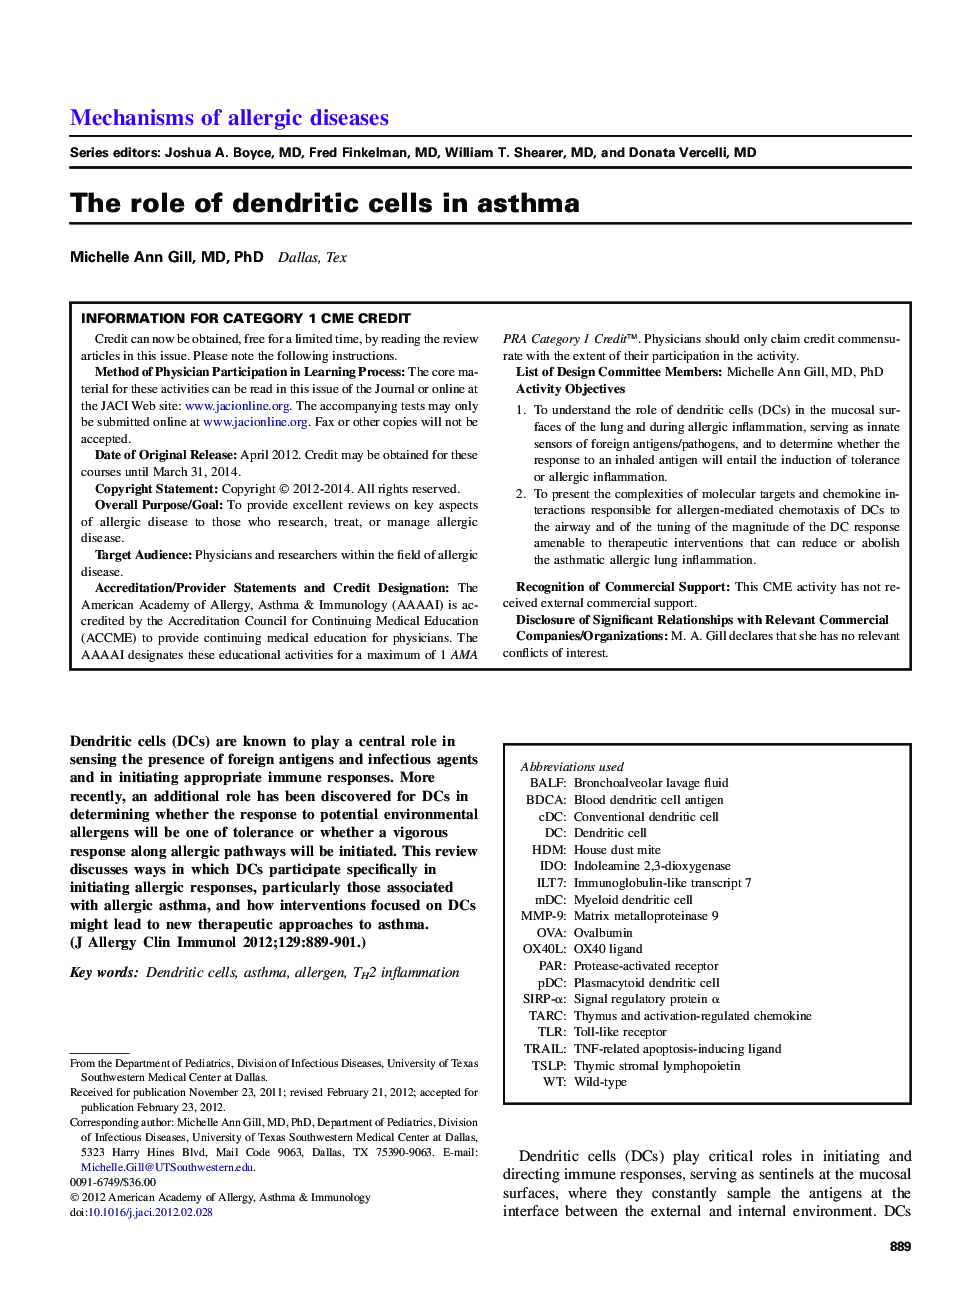 The role of dendritic cells in asthma